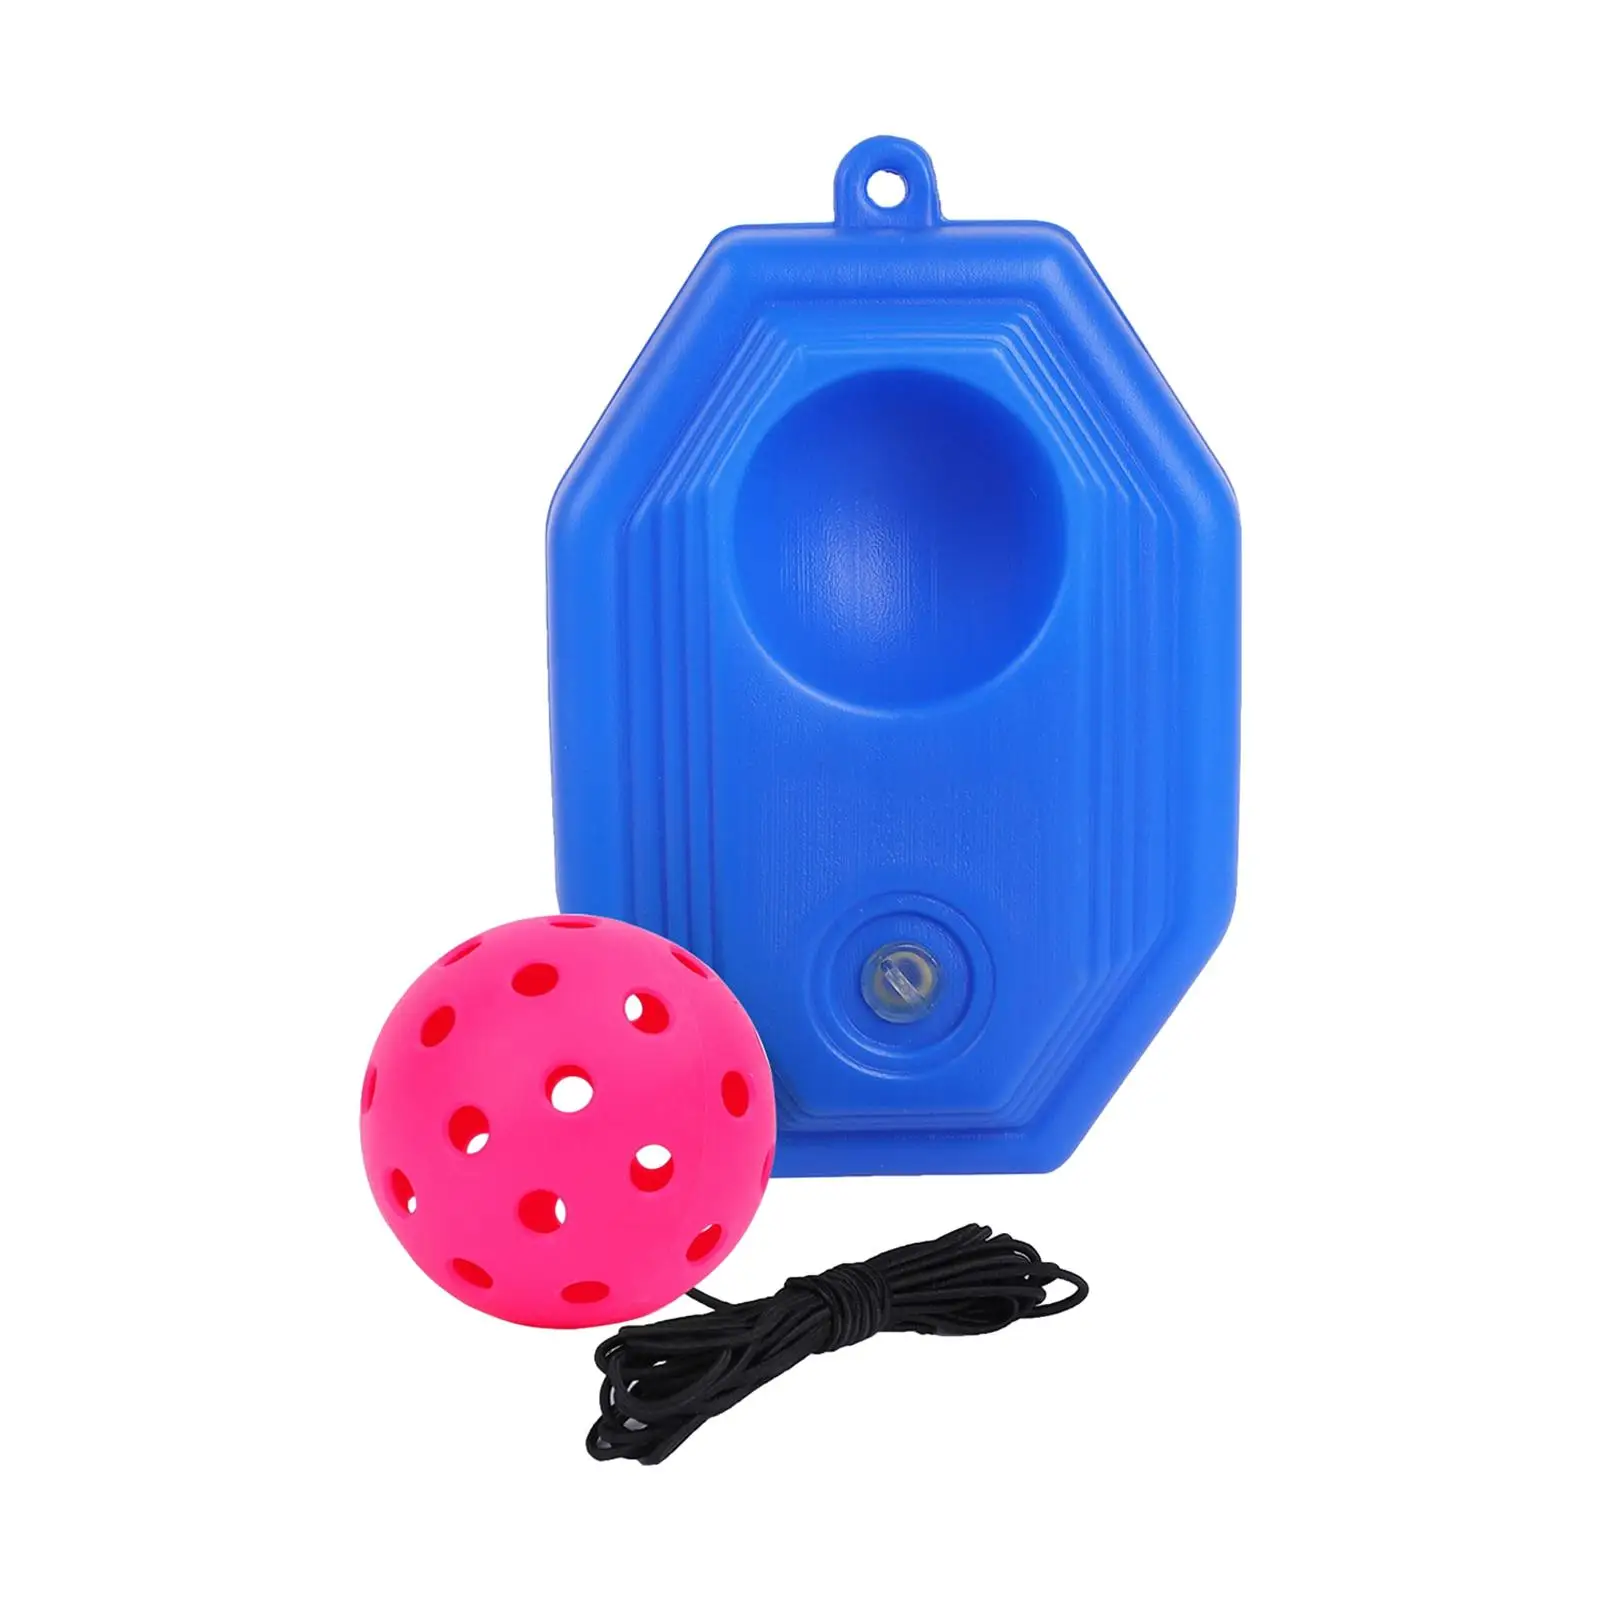 Pickleball Trainer Portable with 40 Holes Pickleball Ball Pickleball Rebounder for Exercise Tool Beginners Practice Kids Adults